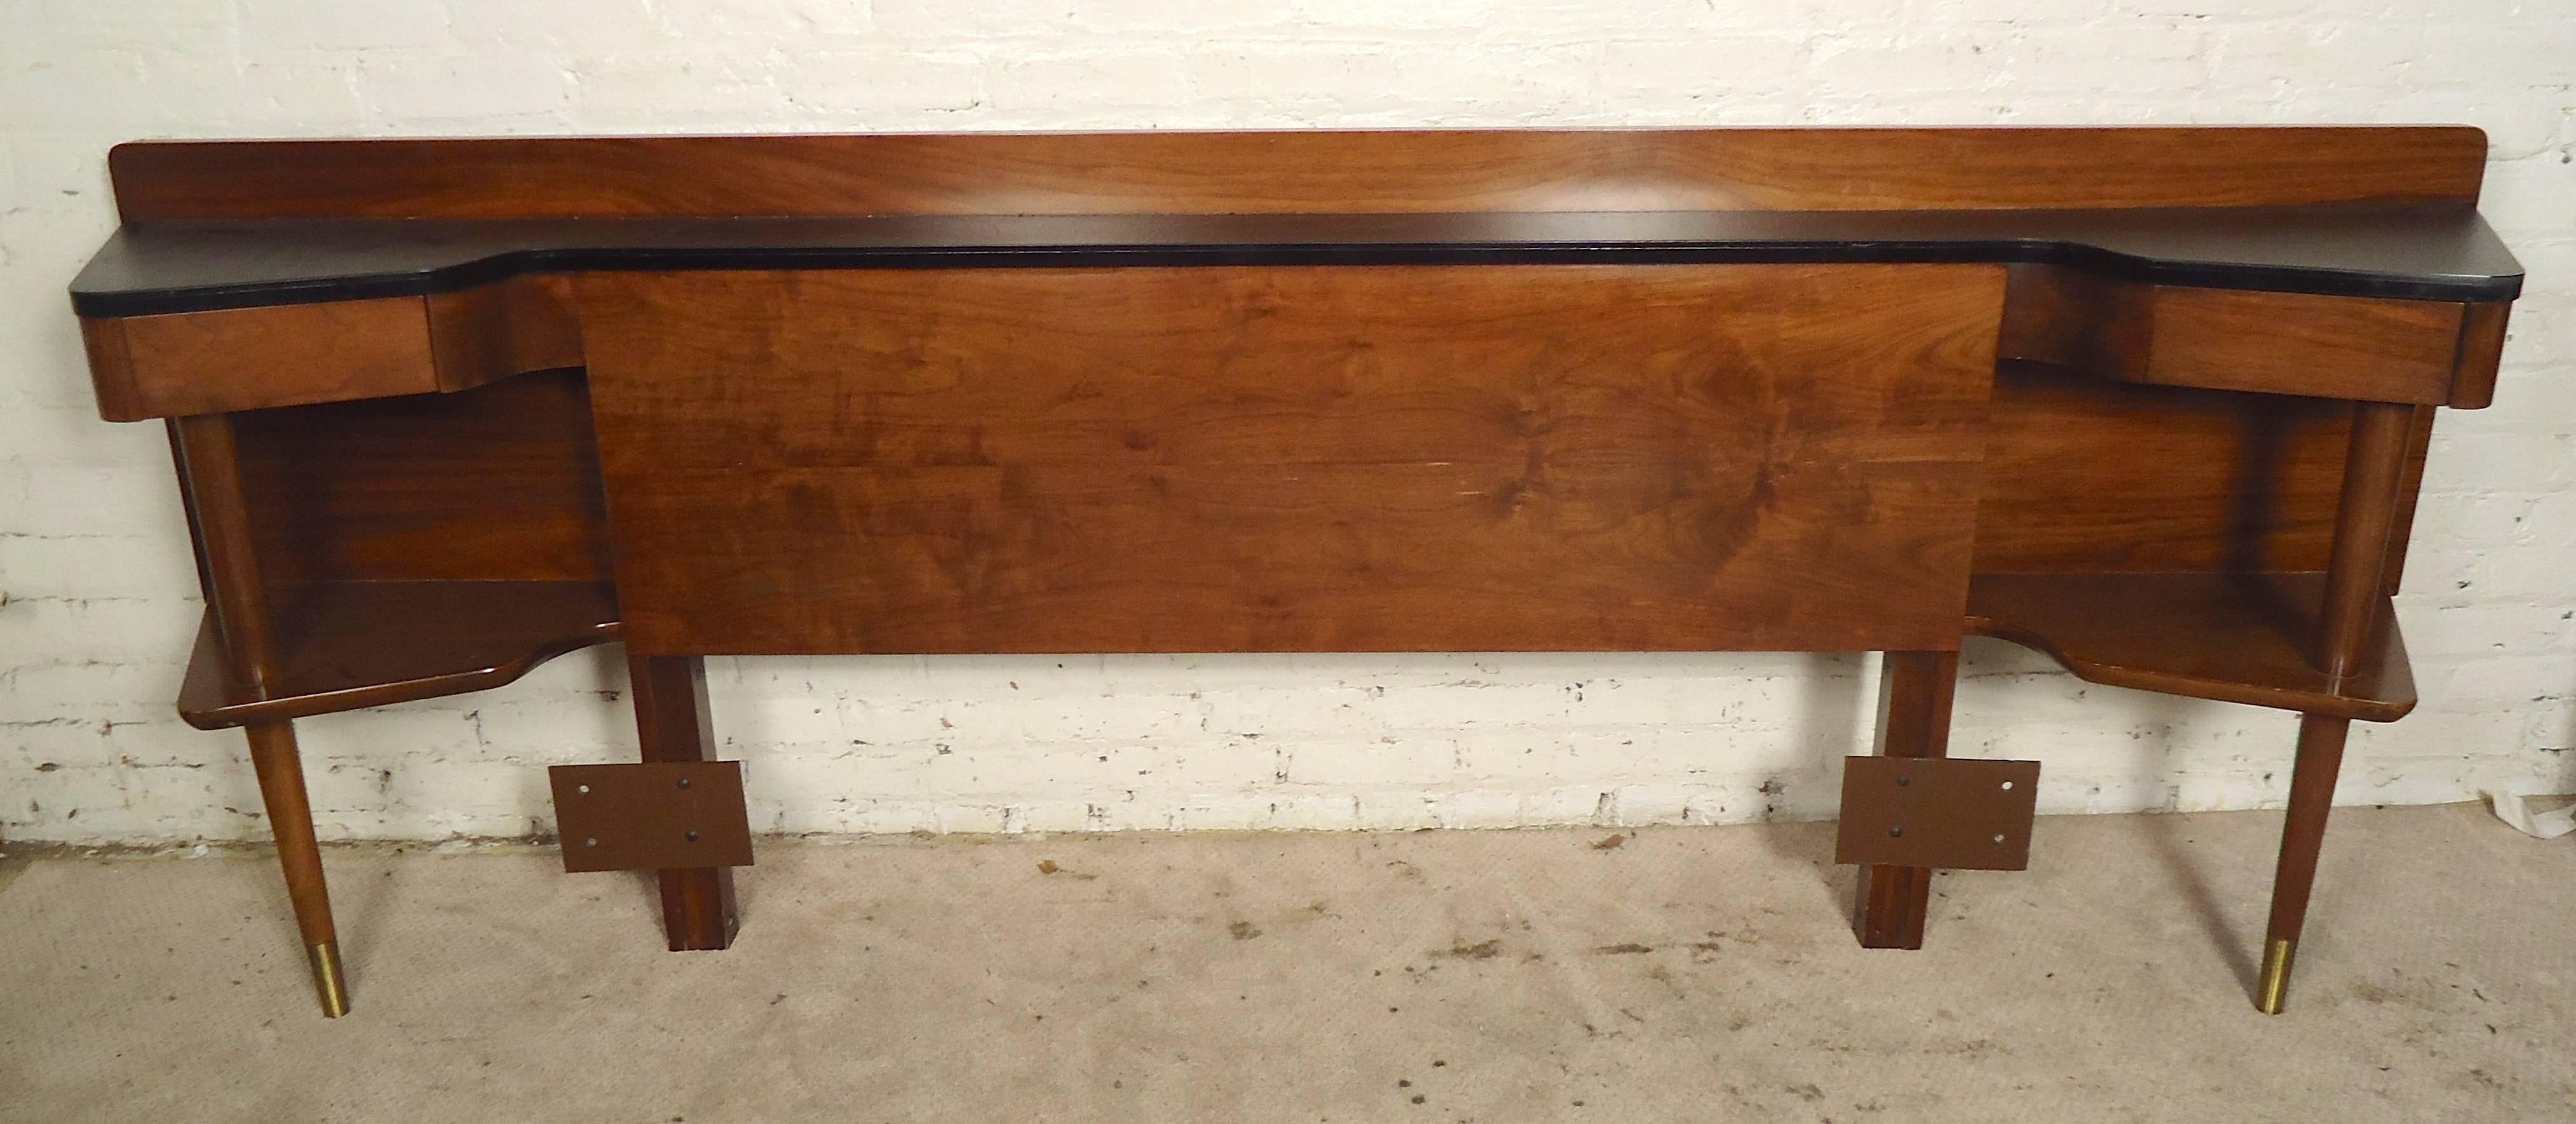 Queen size headboard made by American Of Martinsville. Walnut grain with faux leather top and brass detailing. Long shelf for books, two side drawers and lower shelf for storage.
Matching dressers available.
[62